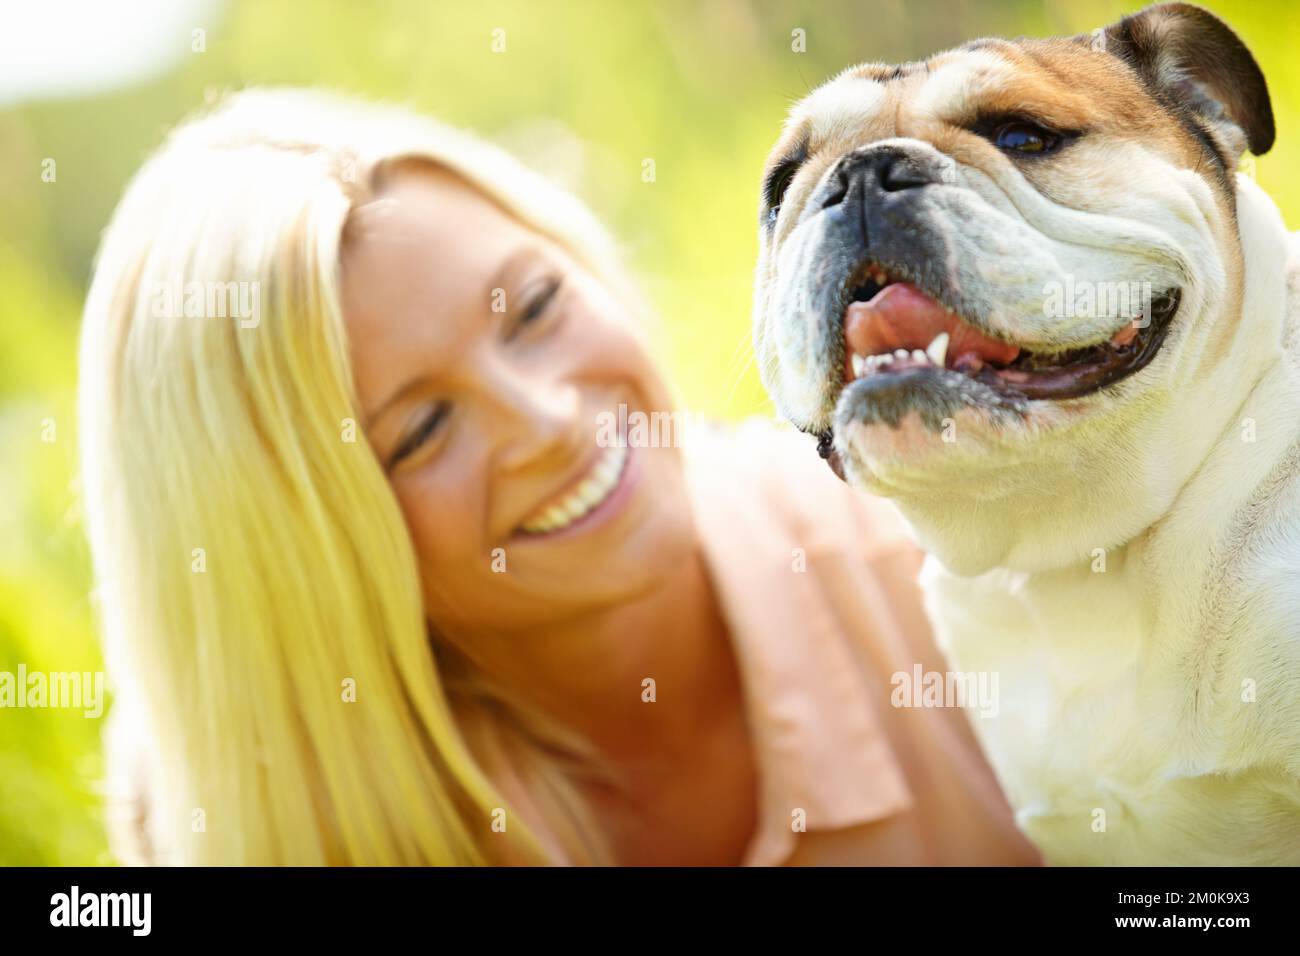 He smiles all the time. Portrait of a happy dog with his owner. Stock Photo